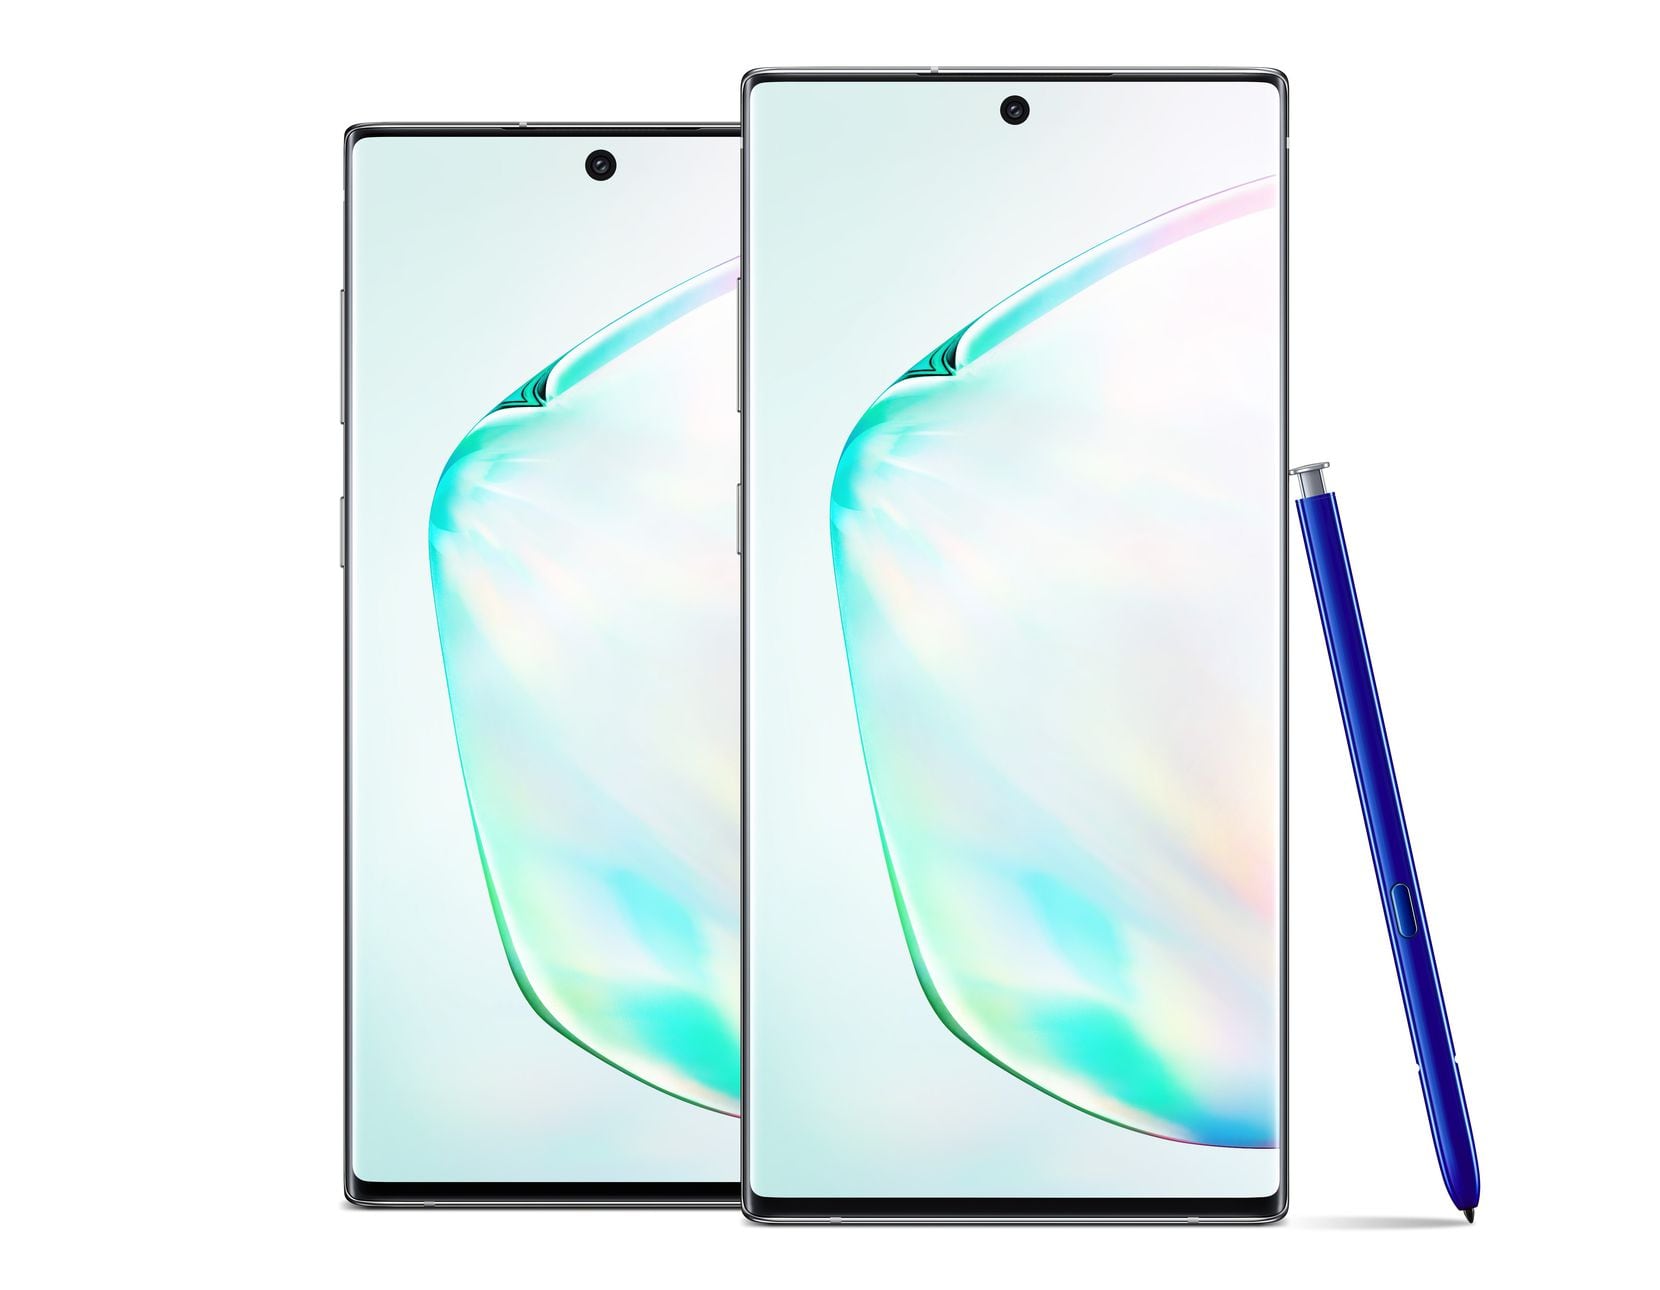 The Samsung Galaxy Note 10 (left), and Note 10+.